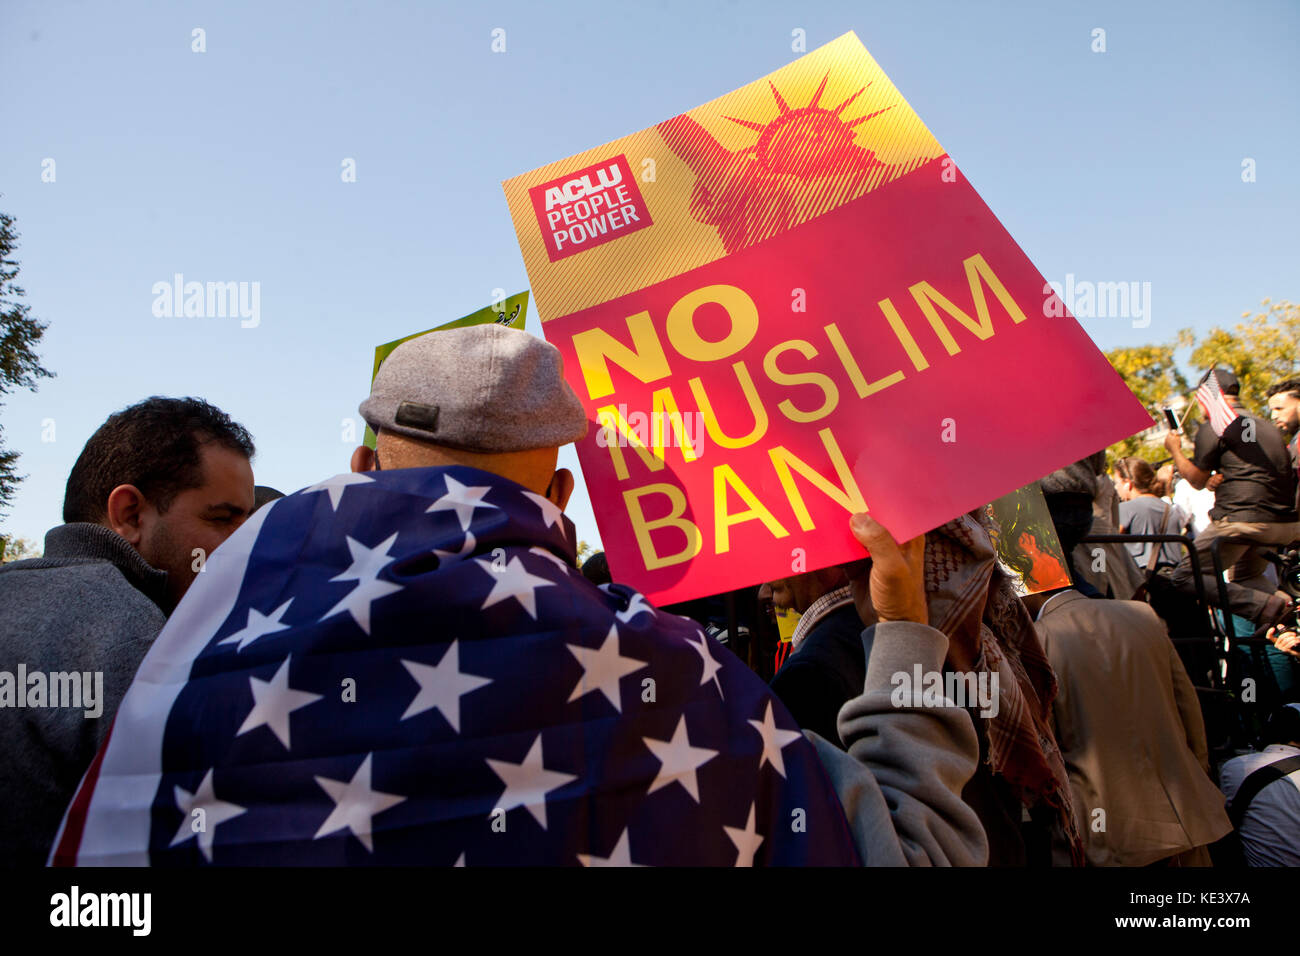 Wednesday, October  18th, 2017, Washington, DC USA: Hundreds of Muslim Americans and supporters protest the Trump administration's attempts of 'Muslim Ban' at Lafayette Square, just outside of the White House. Credit: B Christopher/Alamy Live News Stock Photo